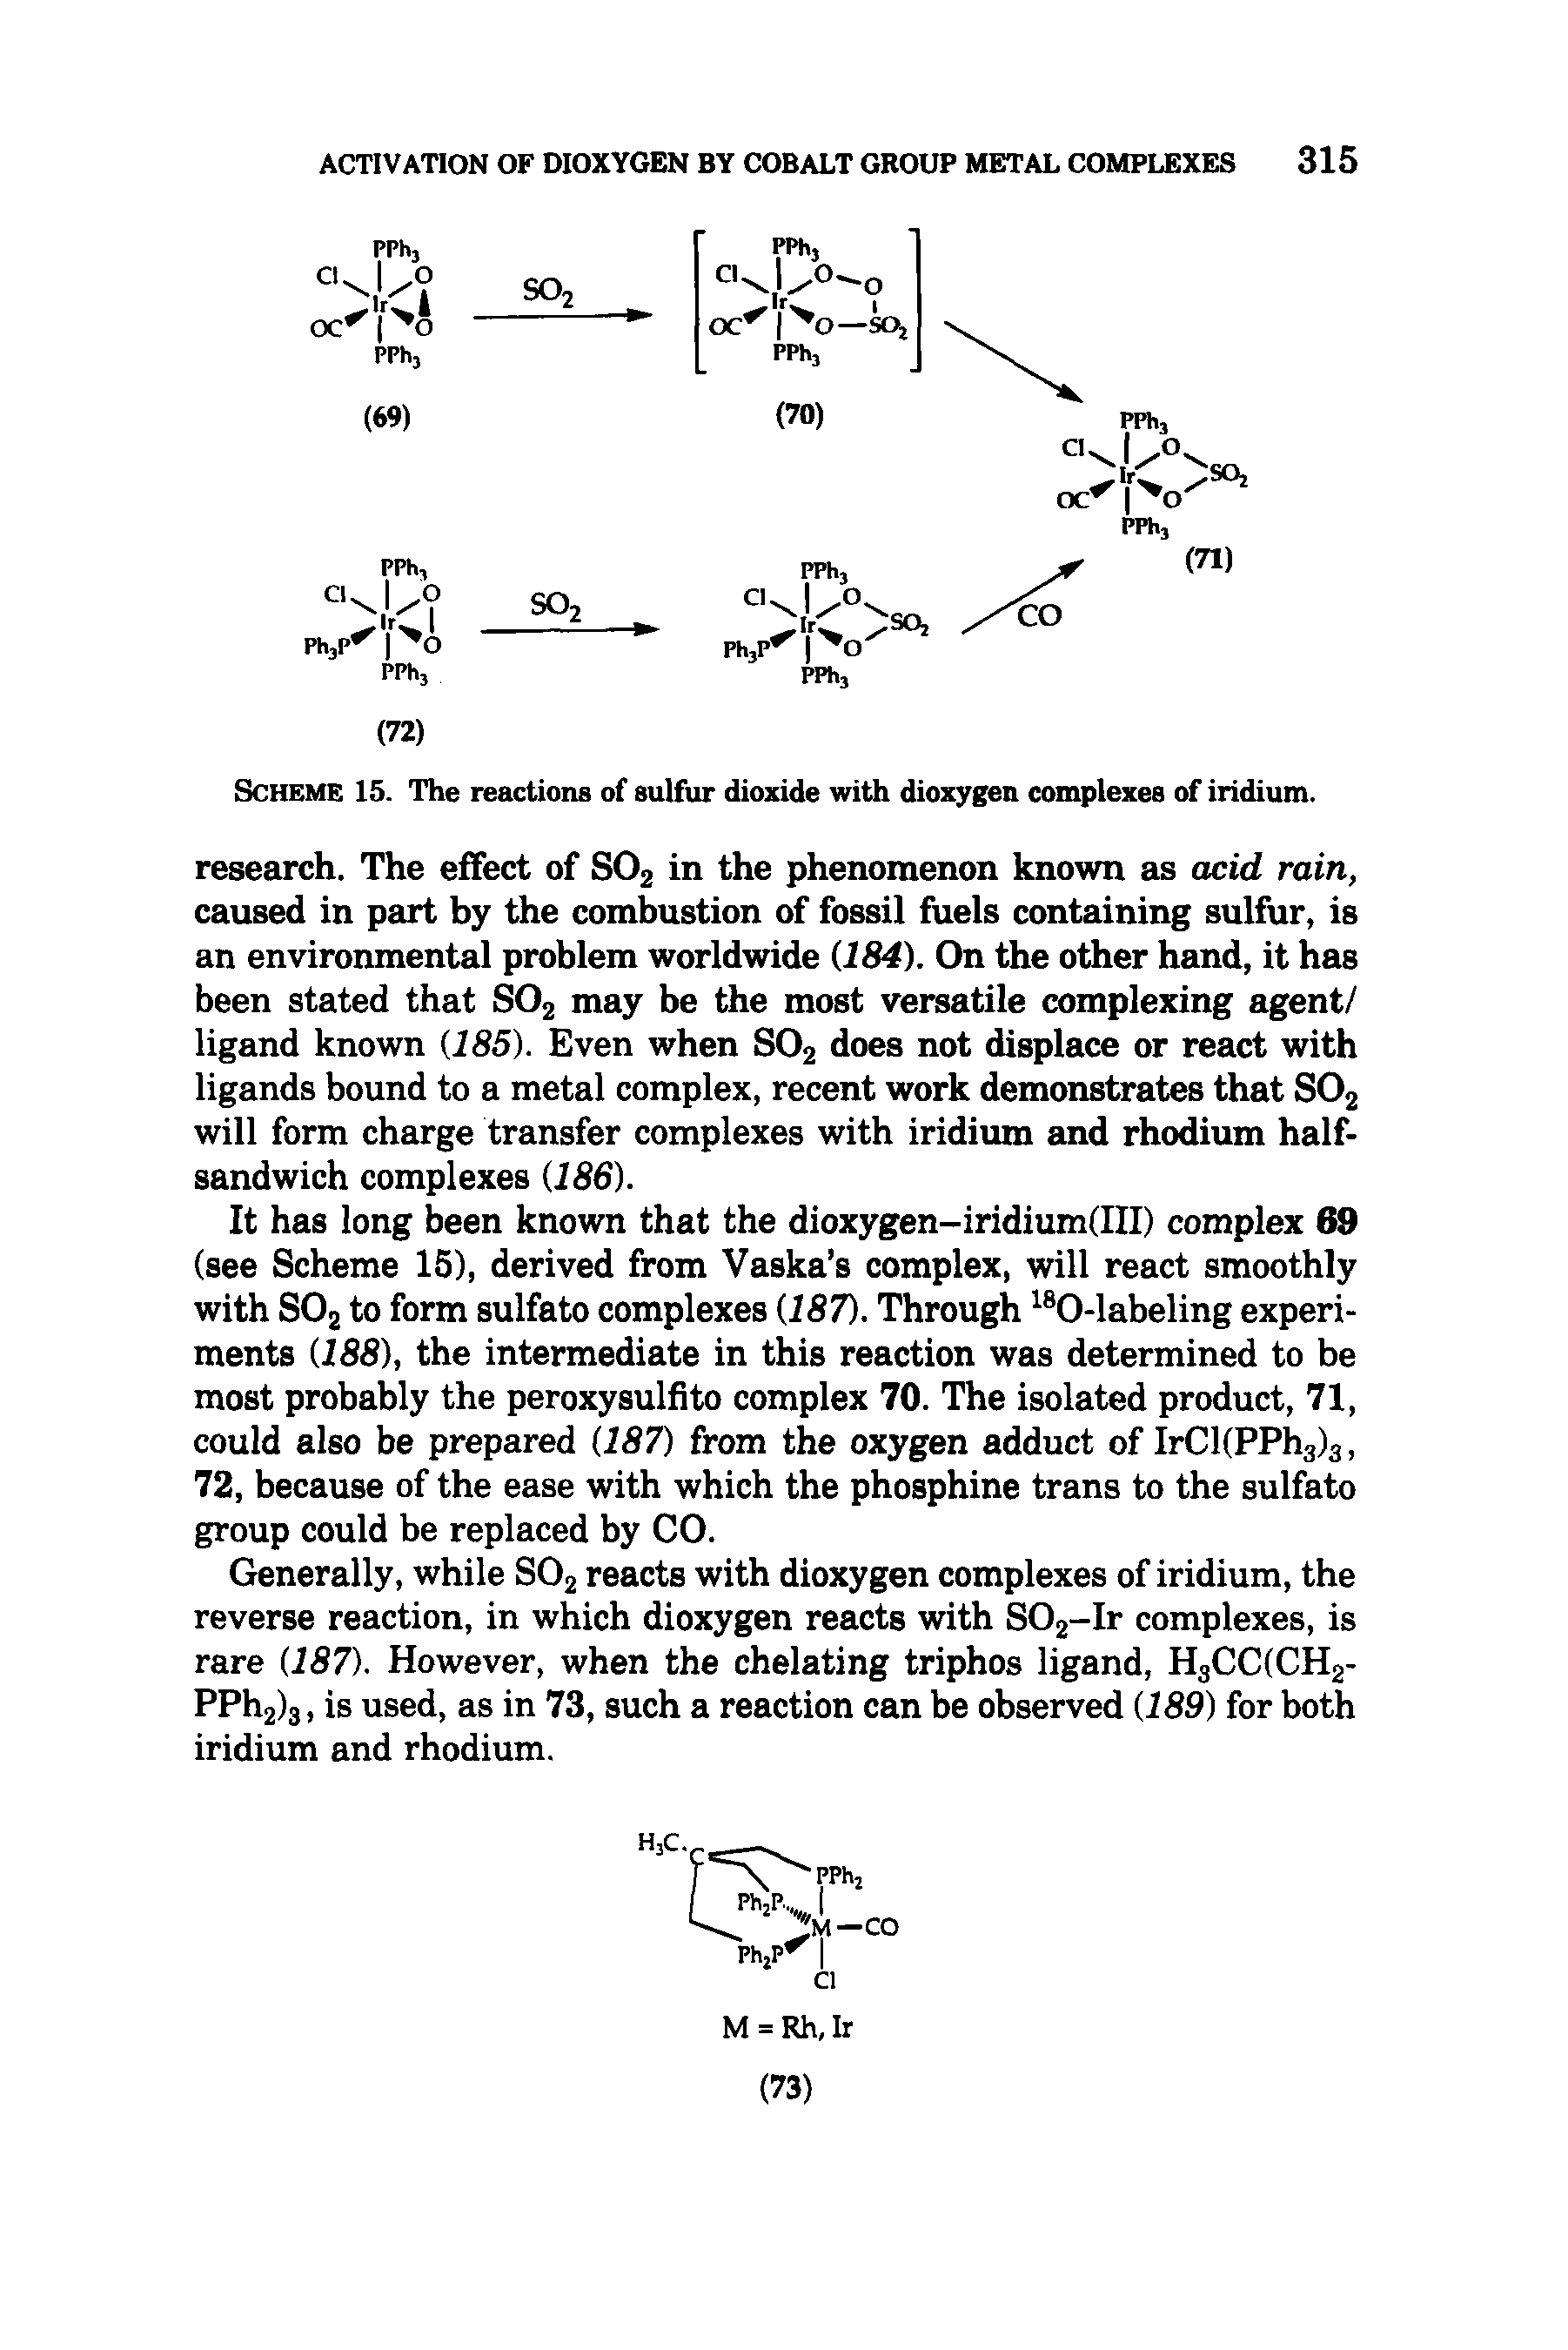 Scheme 15. The reactions of sulfur dioxide with dioxygen complexes of iridium.